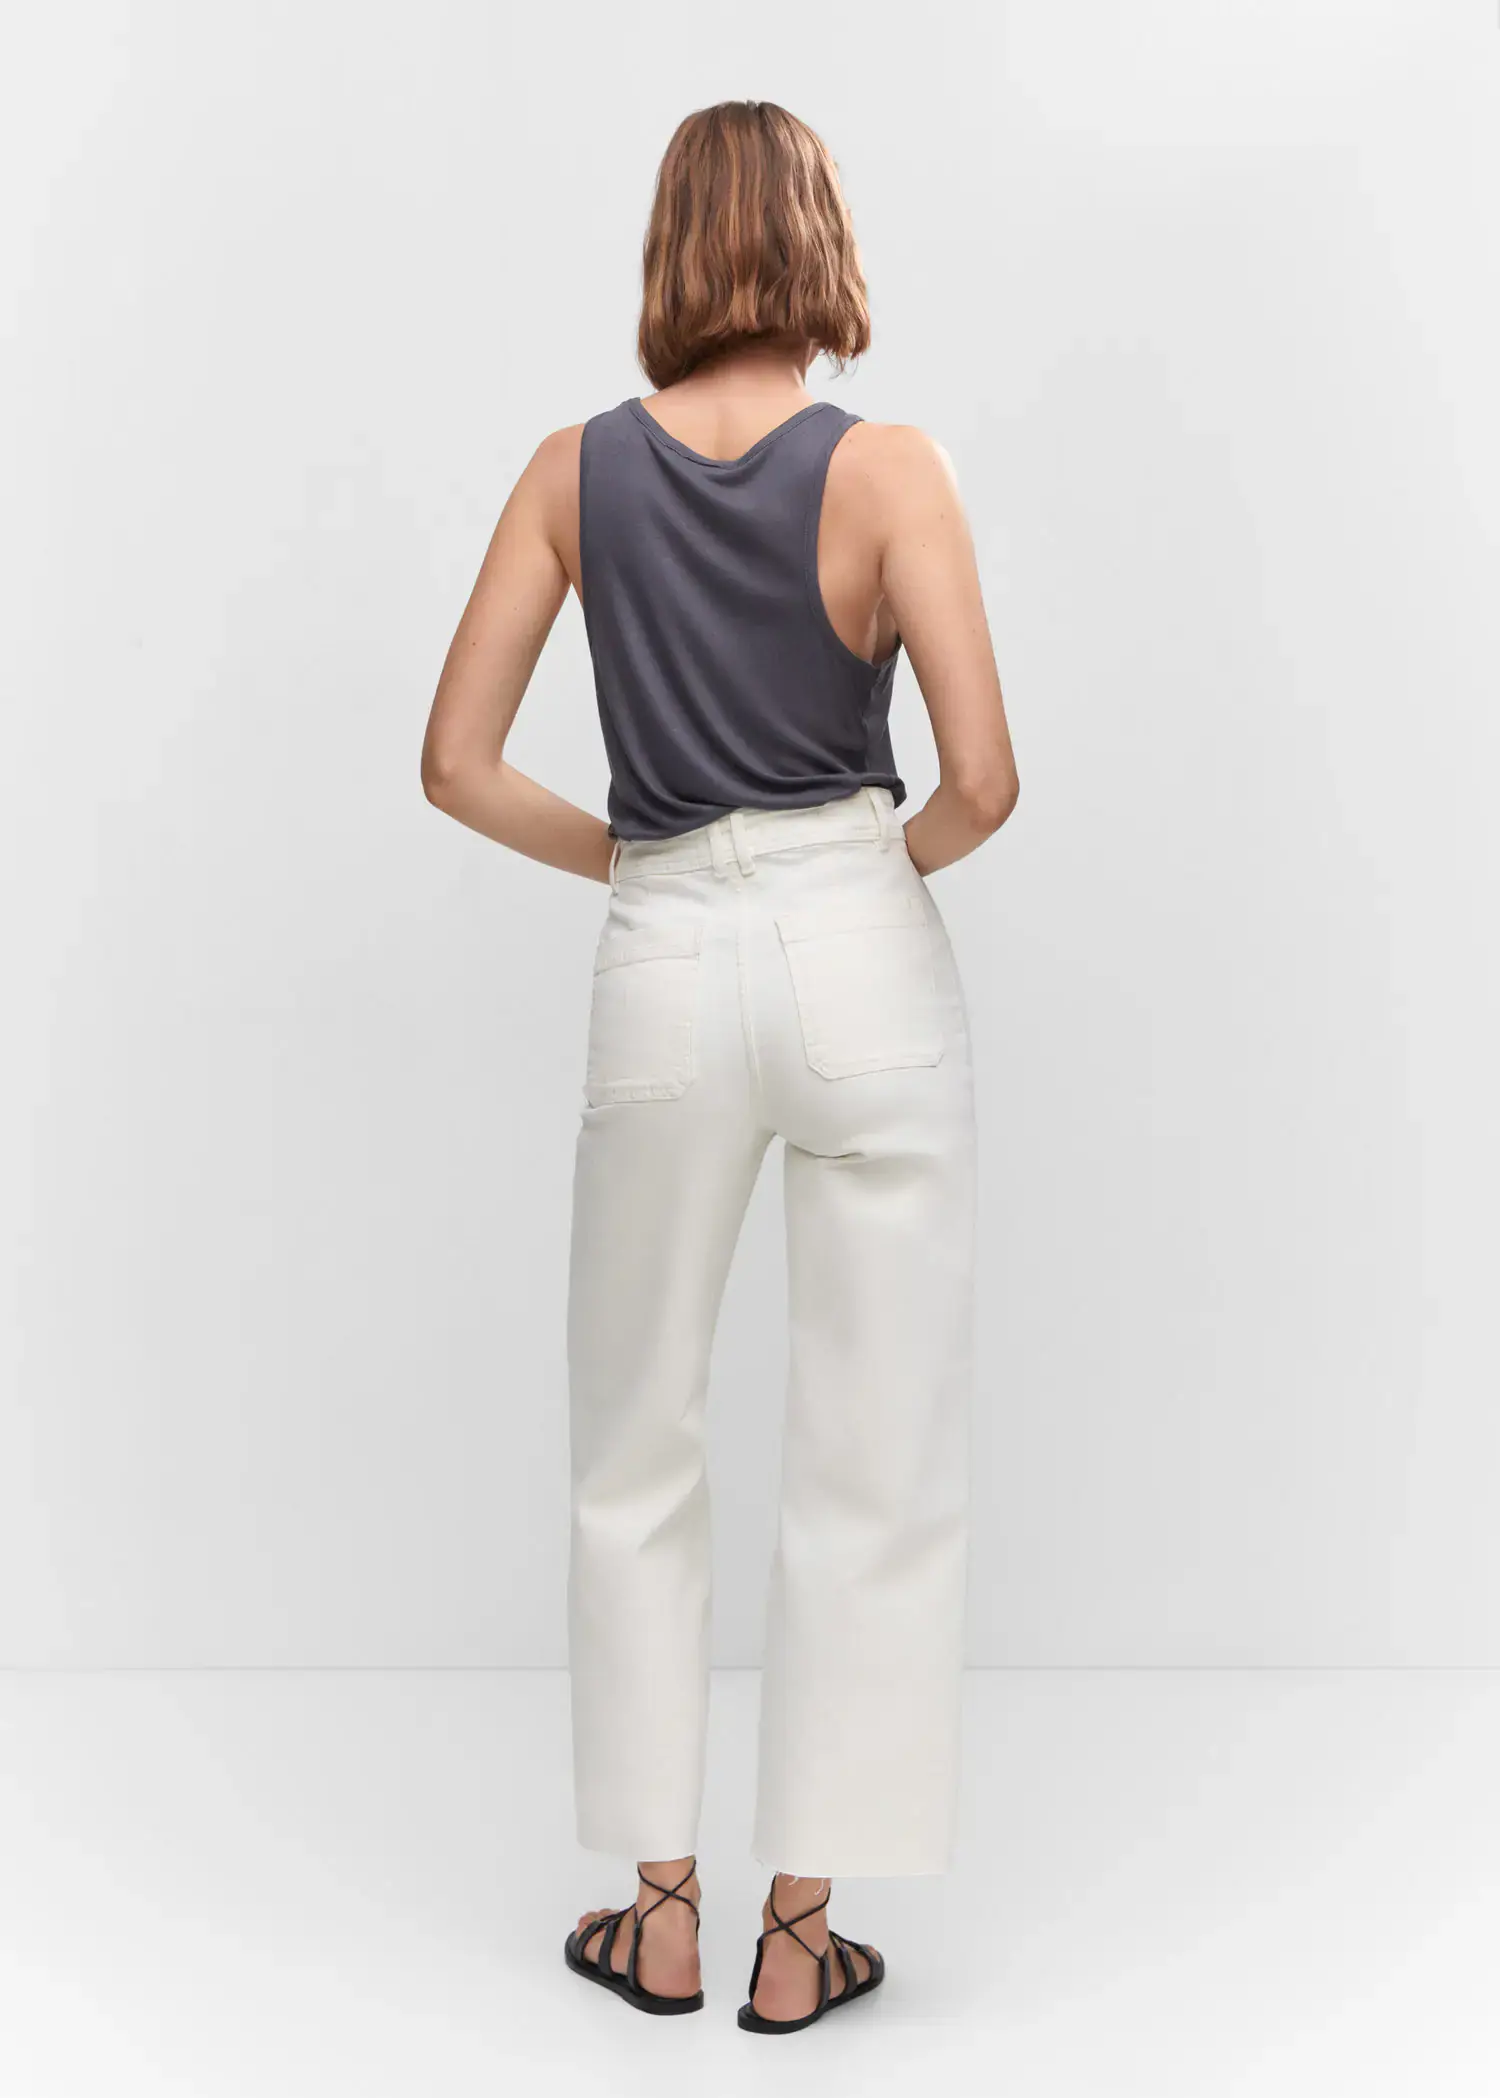 Mango Jeans culotte high waist. a woman wearing white pants and a gray tank top. 